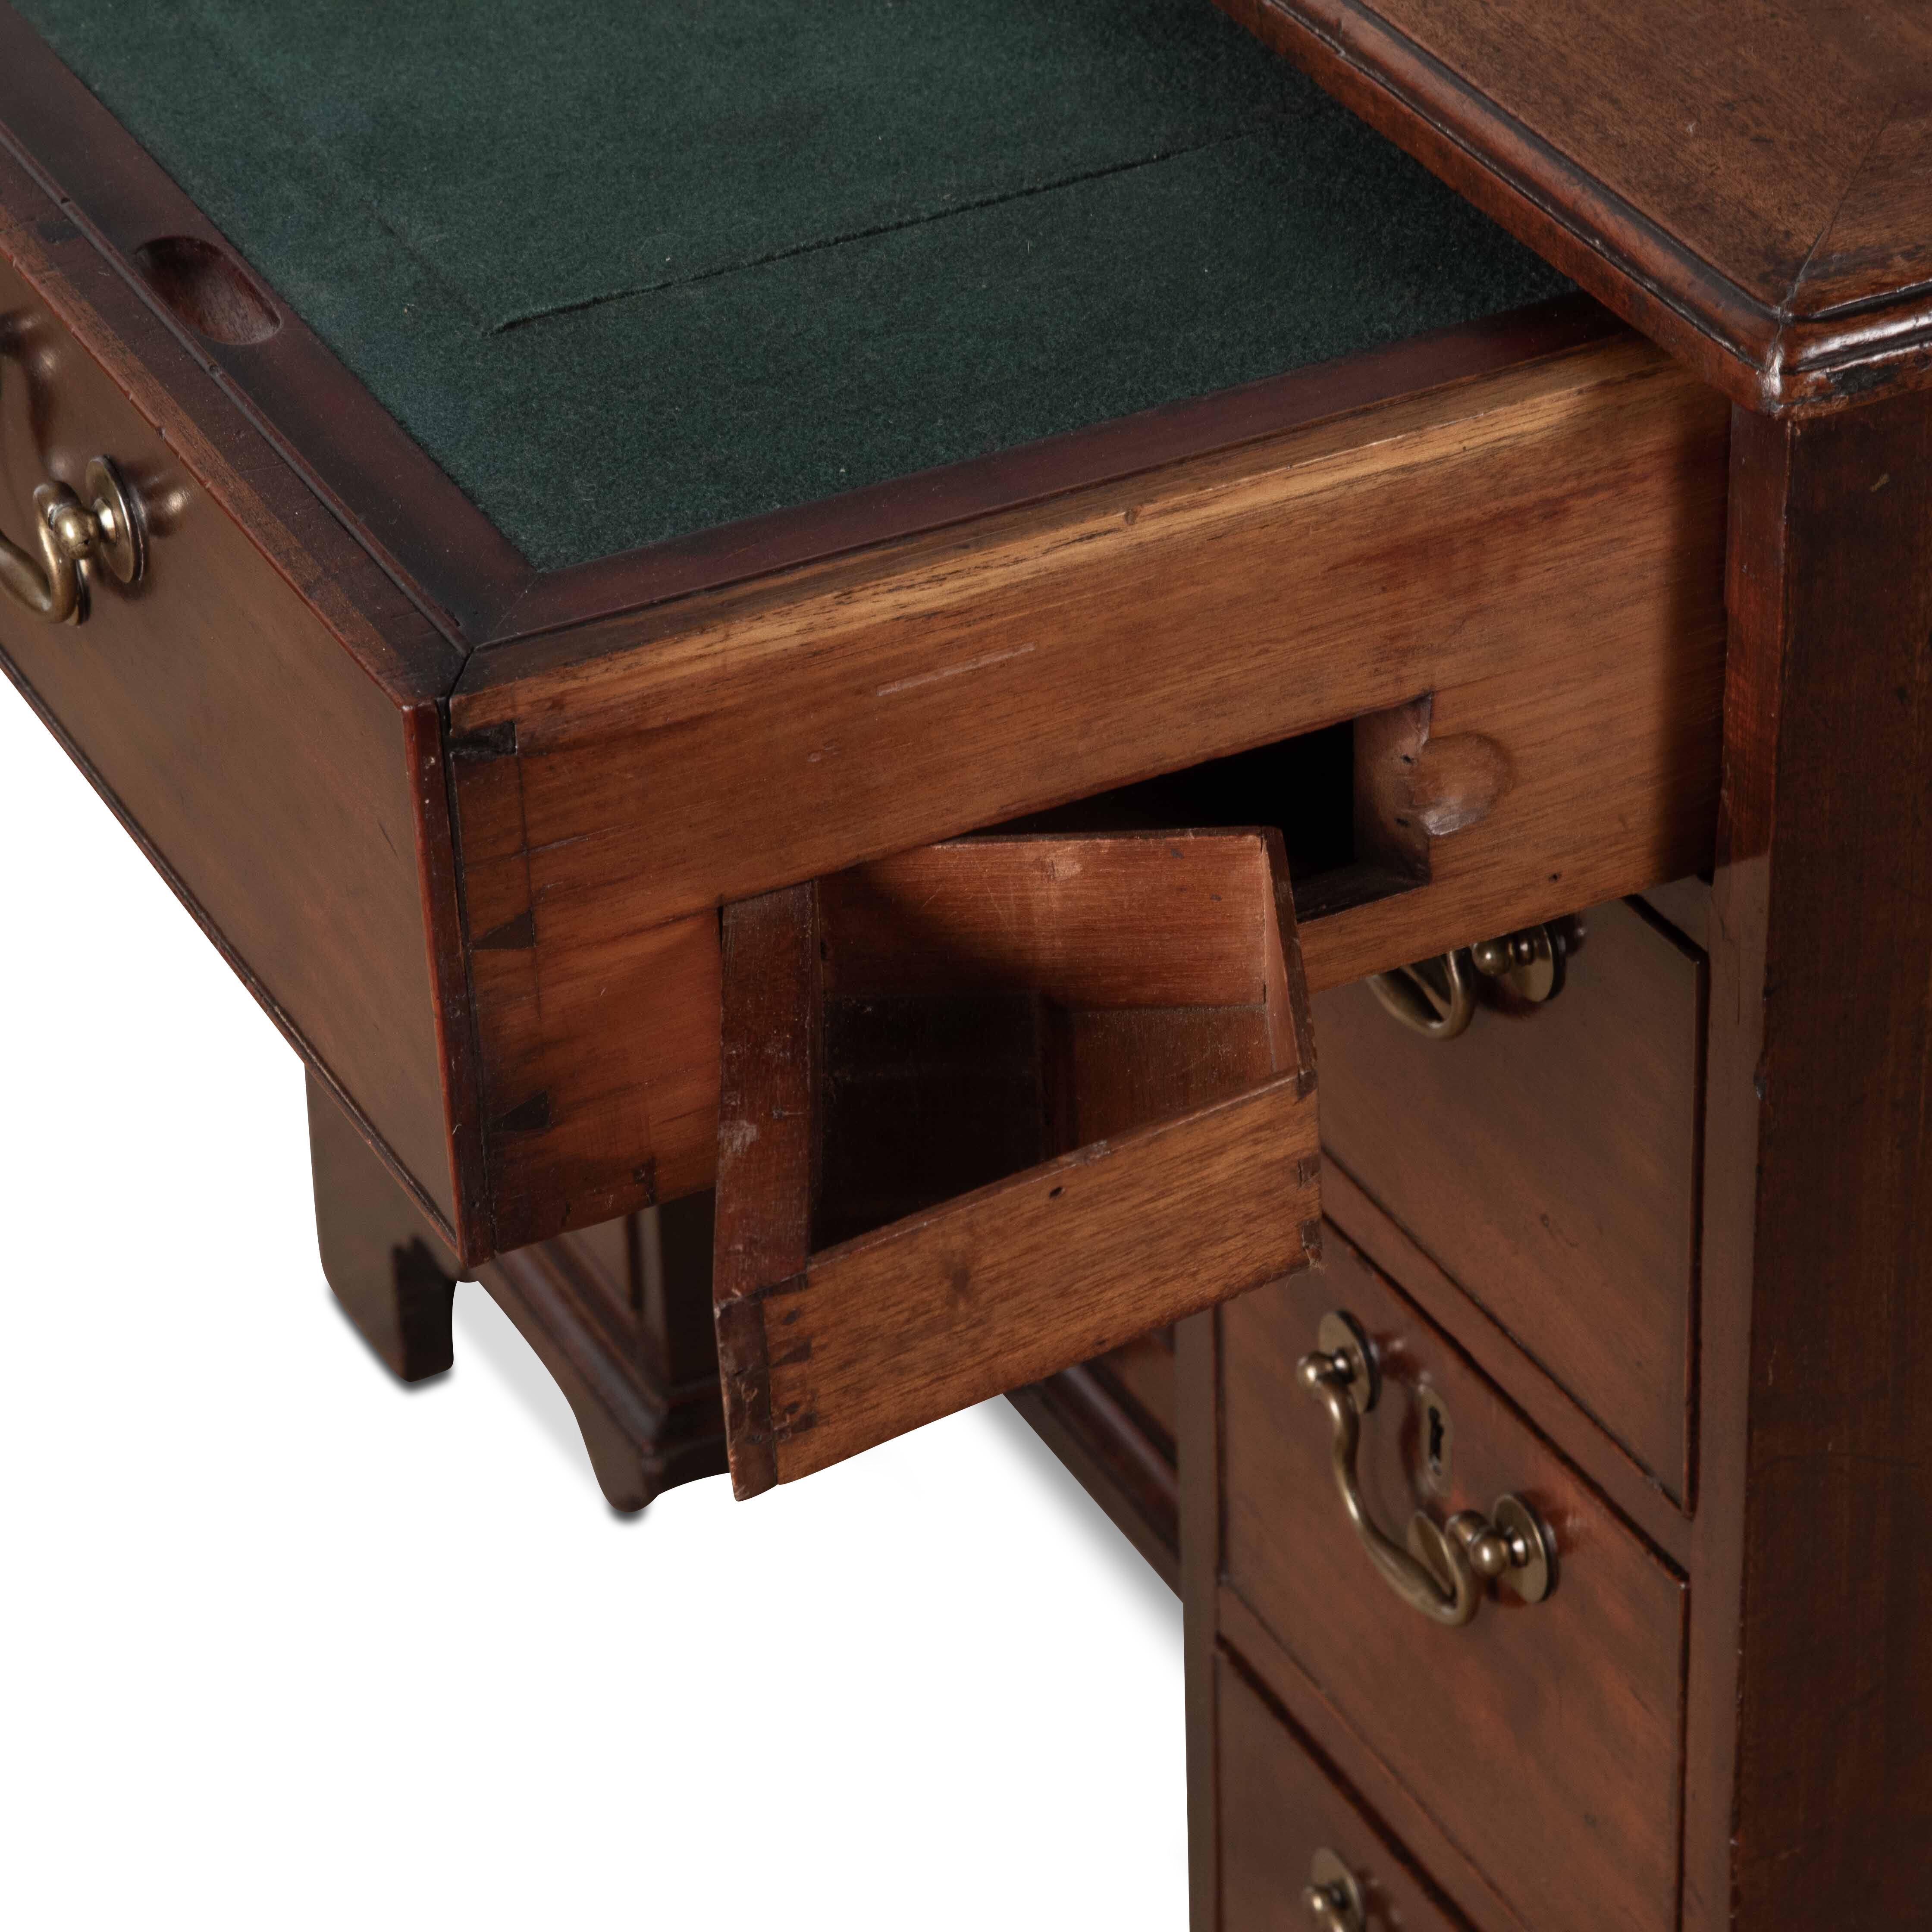  A well made early Geo III mahogany kneehole desk in the manner of Giles Grendy, of unusual form and features. Slightly oversized it holds a presence of quality craftsmanship, with cleated ends to the top with moulded edges, above a long fitted